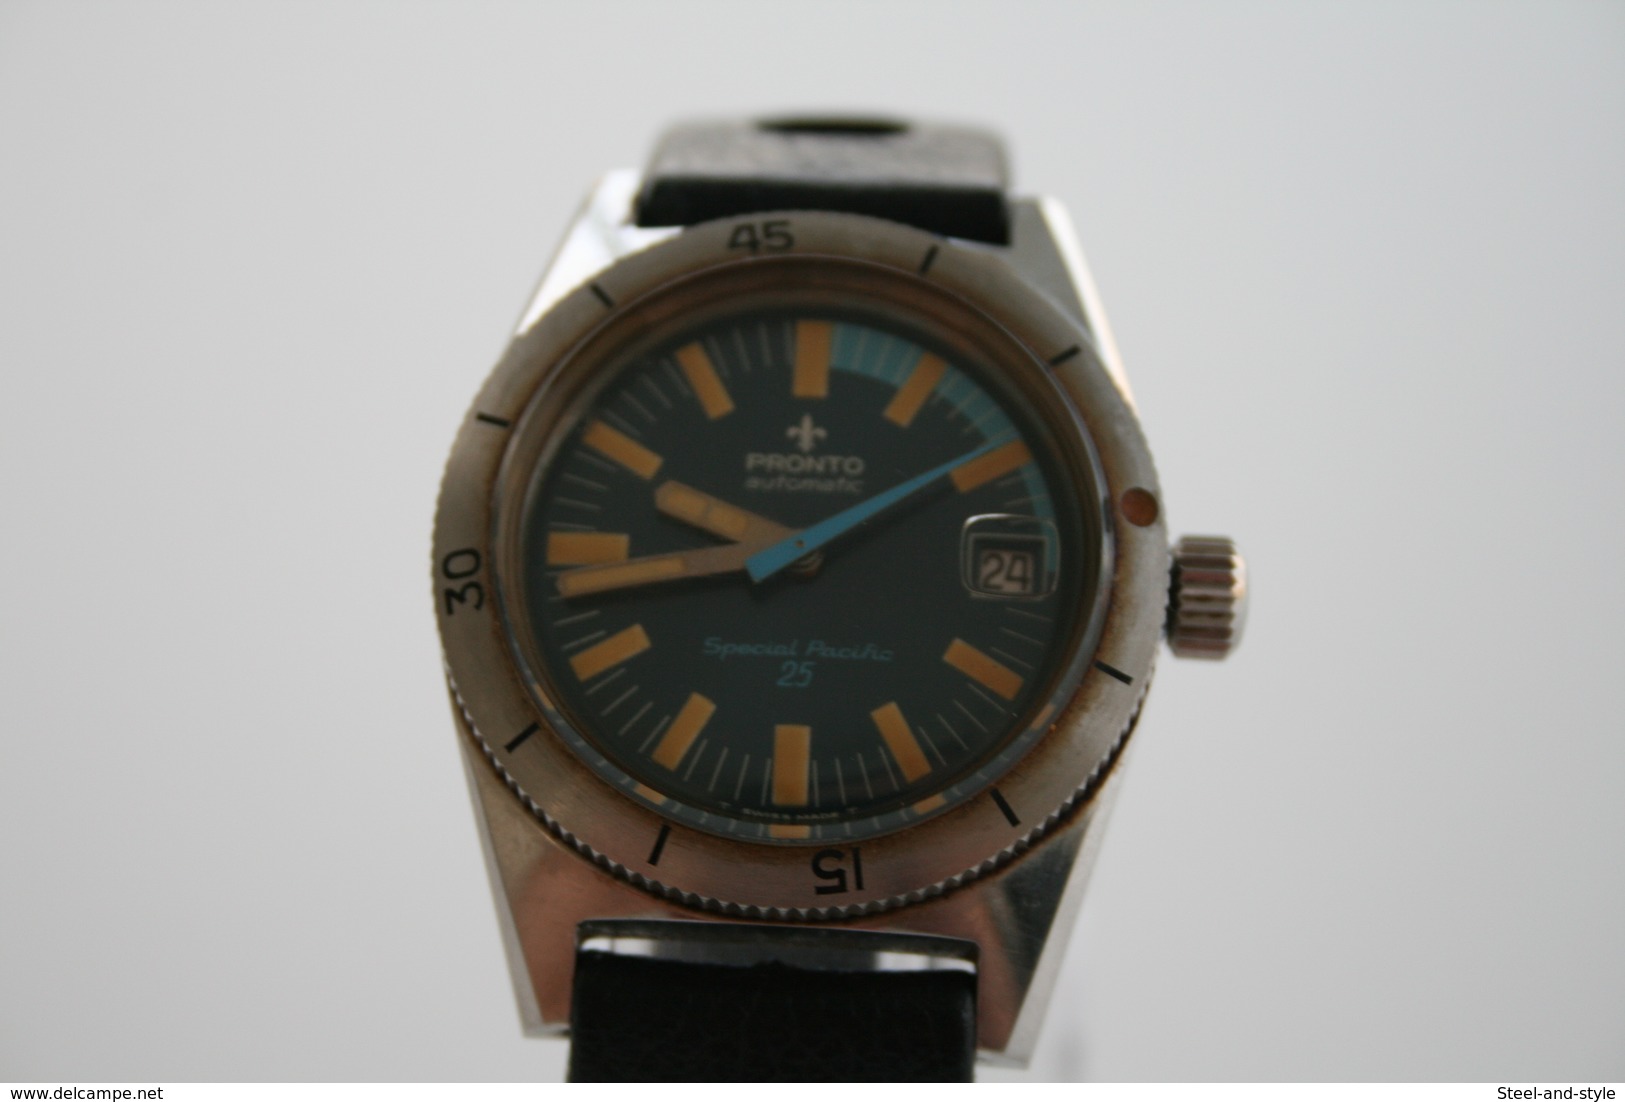 watches : PRONTO AUTOMATIC SPECIAL PACIFIC 25 WITH TROPIC SPORT - original with original BOX AND PAPERS - running -